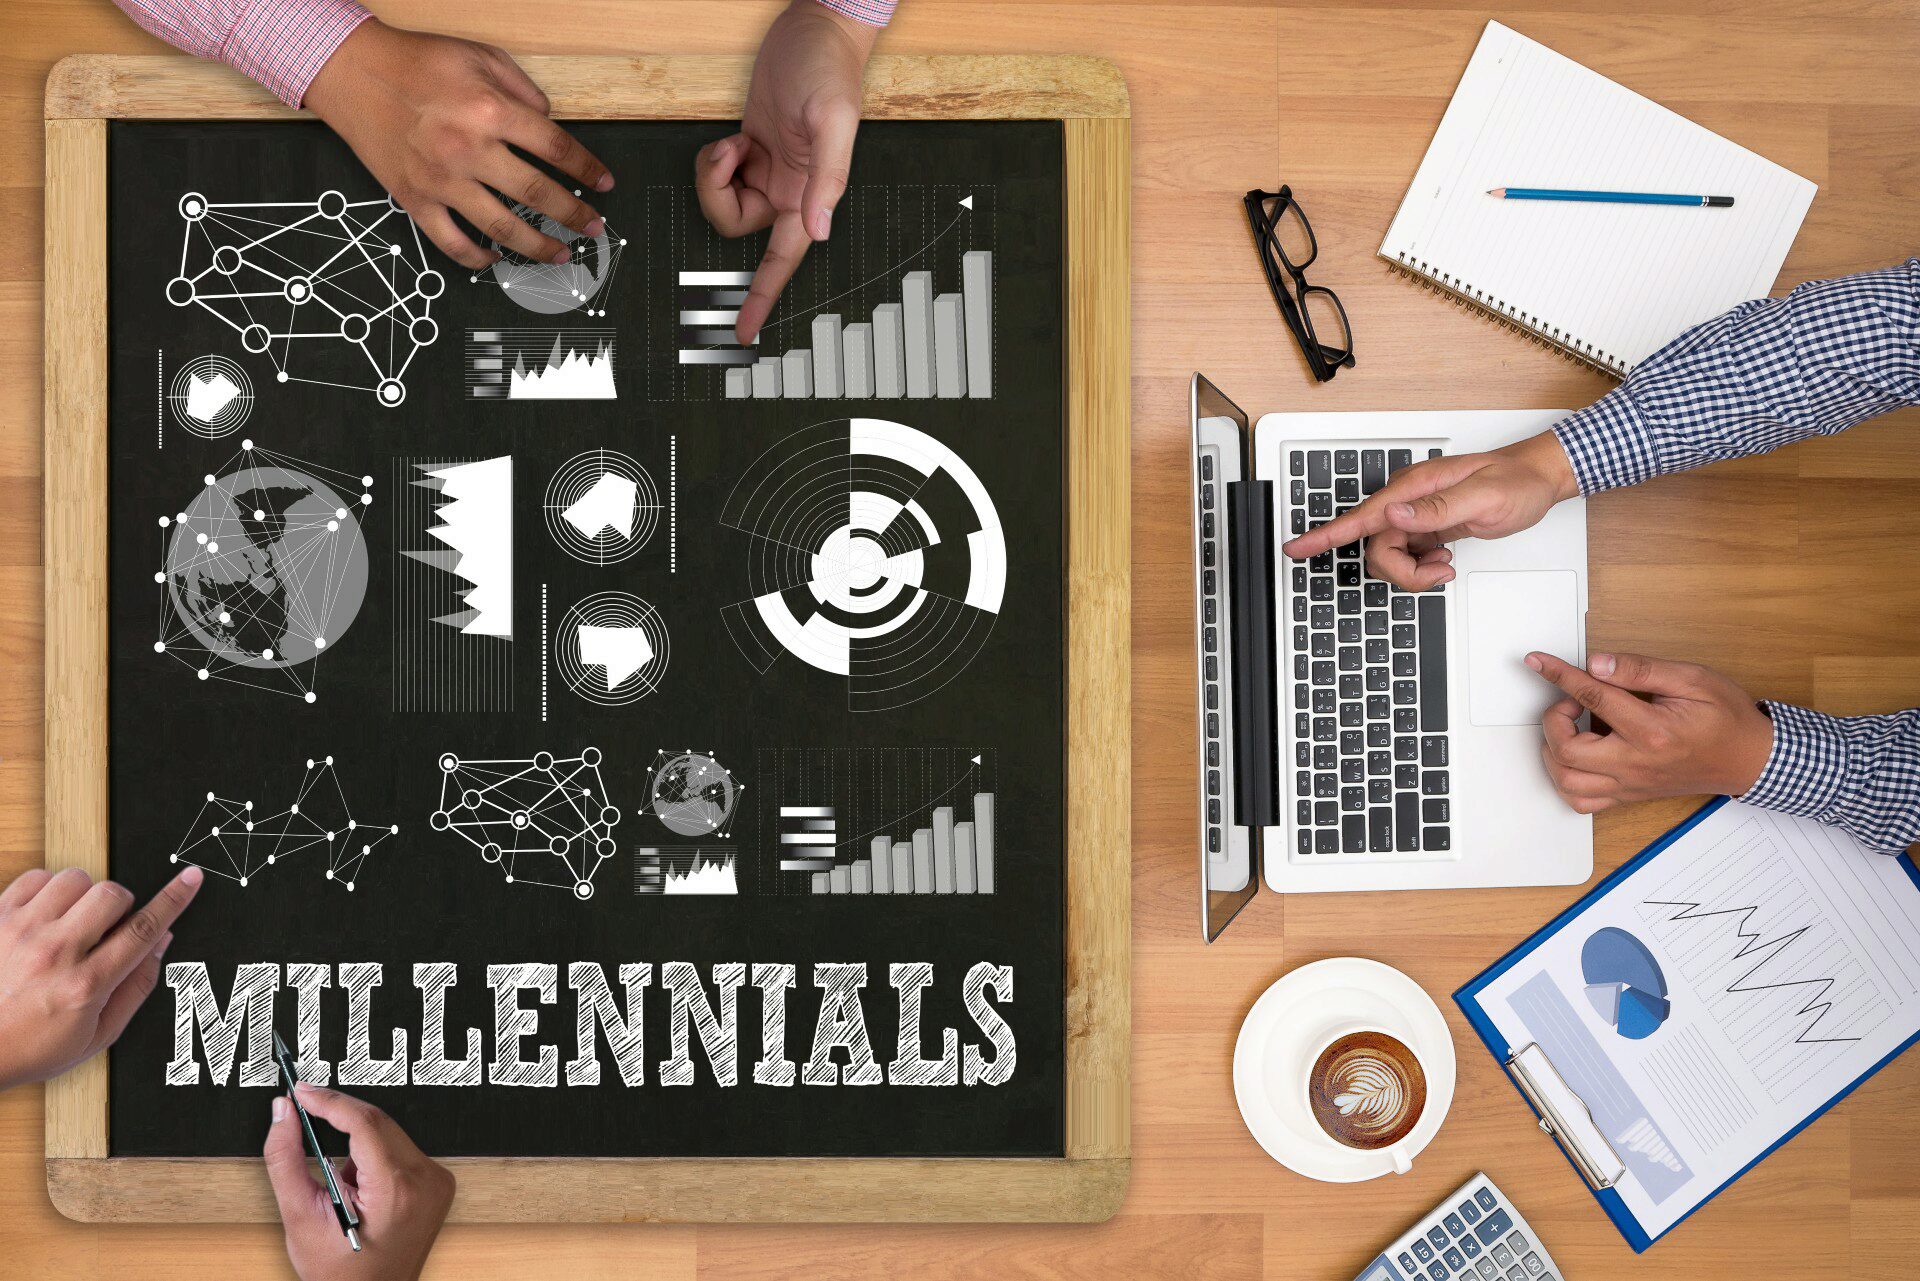 Millennials face an uphill financial climb as they save for retirement and make other money decisions. Creative solutions via varied tools and channels may help, explains Surya Kolluri via the RetireSecure Blog.